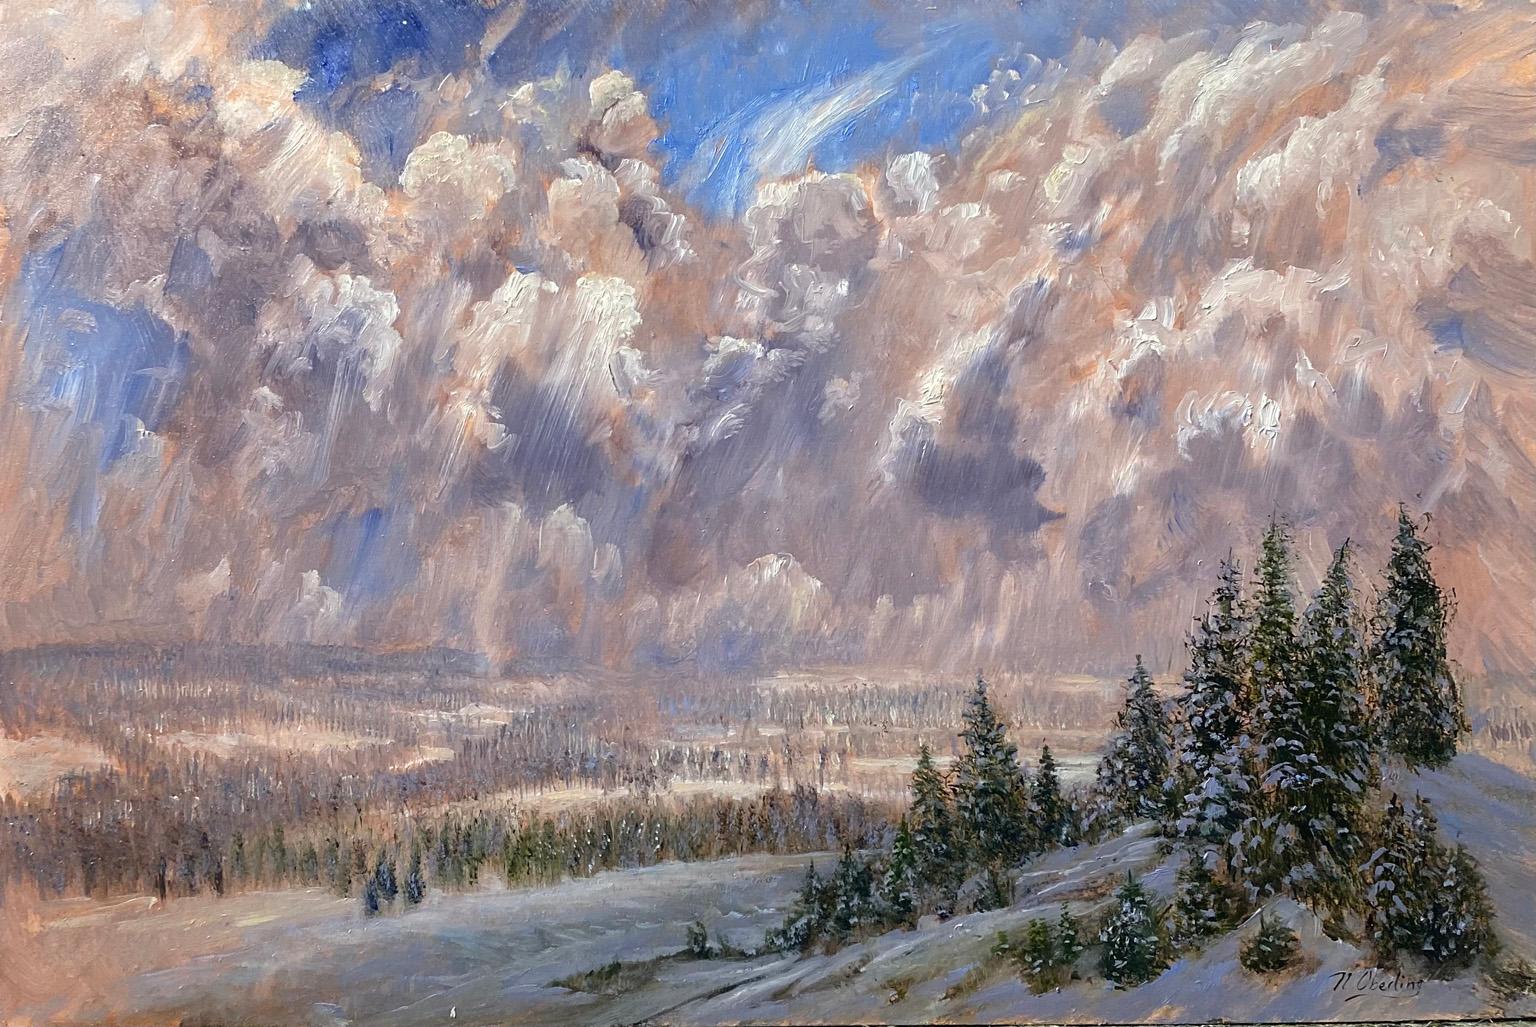 Nicholas Oberling Landscape Painting - Montana Winter Solstice in Flathead Valley Montana